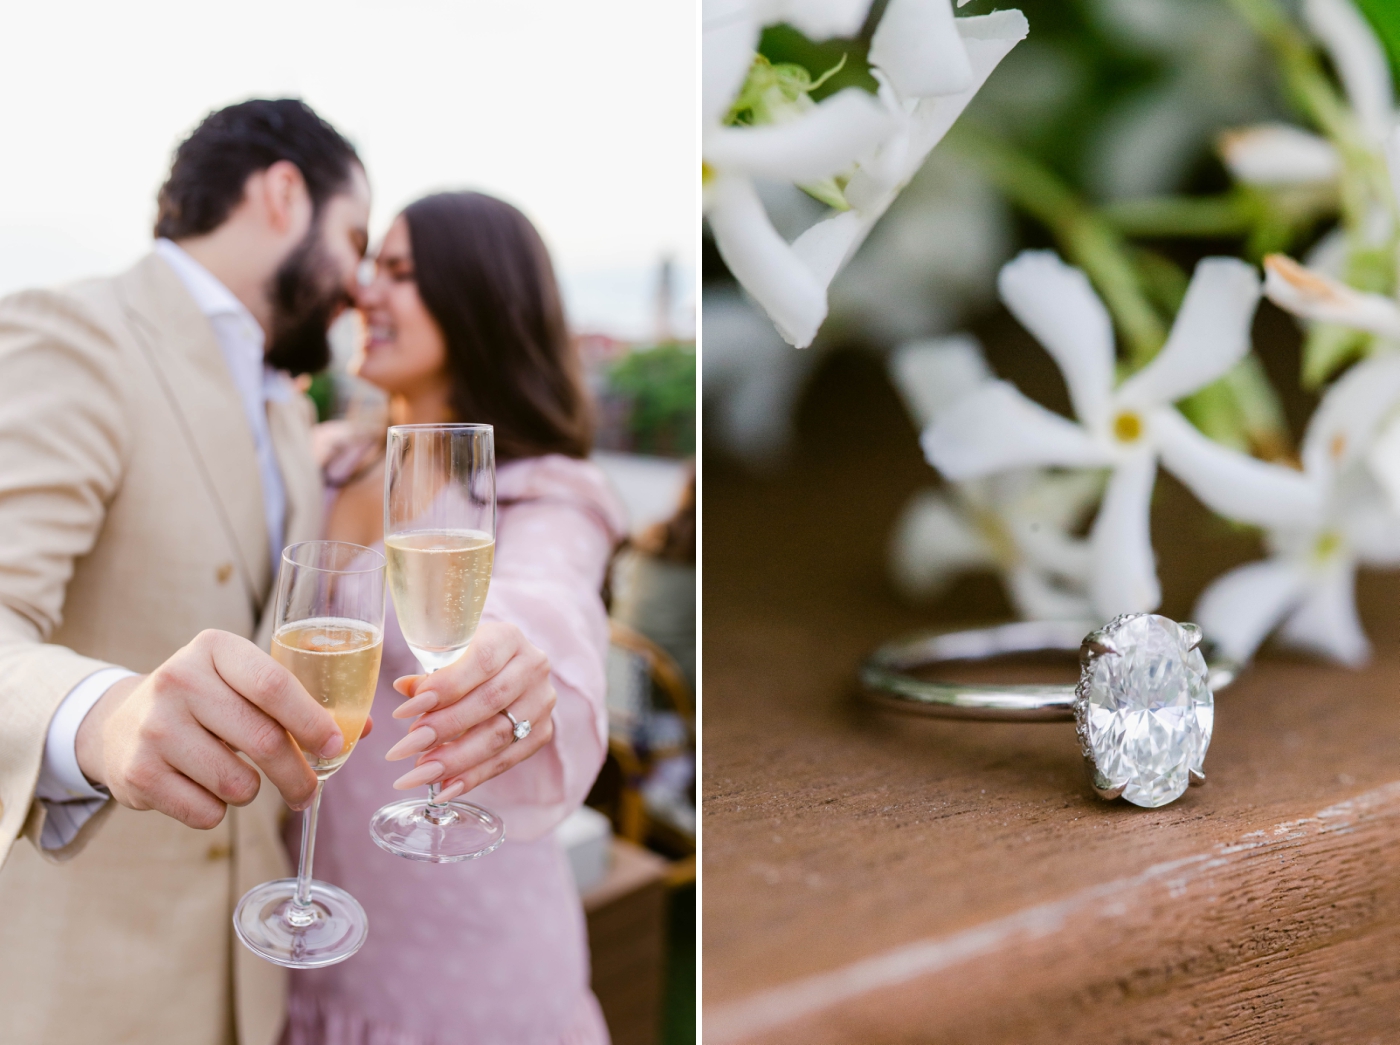 How to start planning a wedding in Savannah